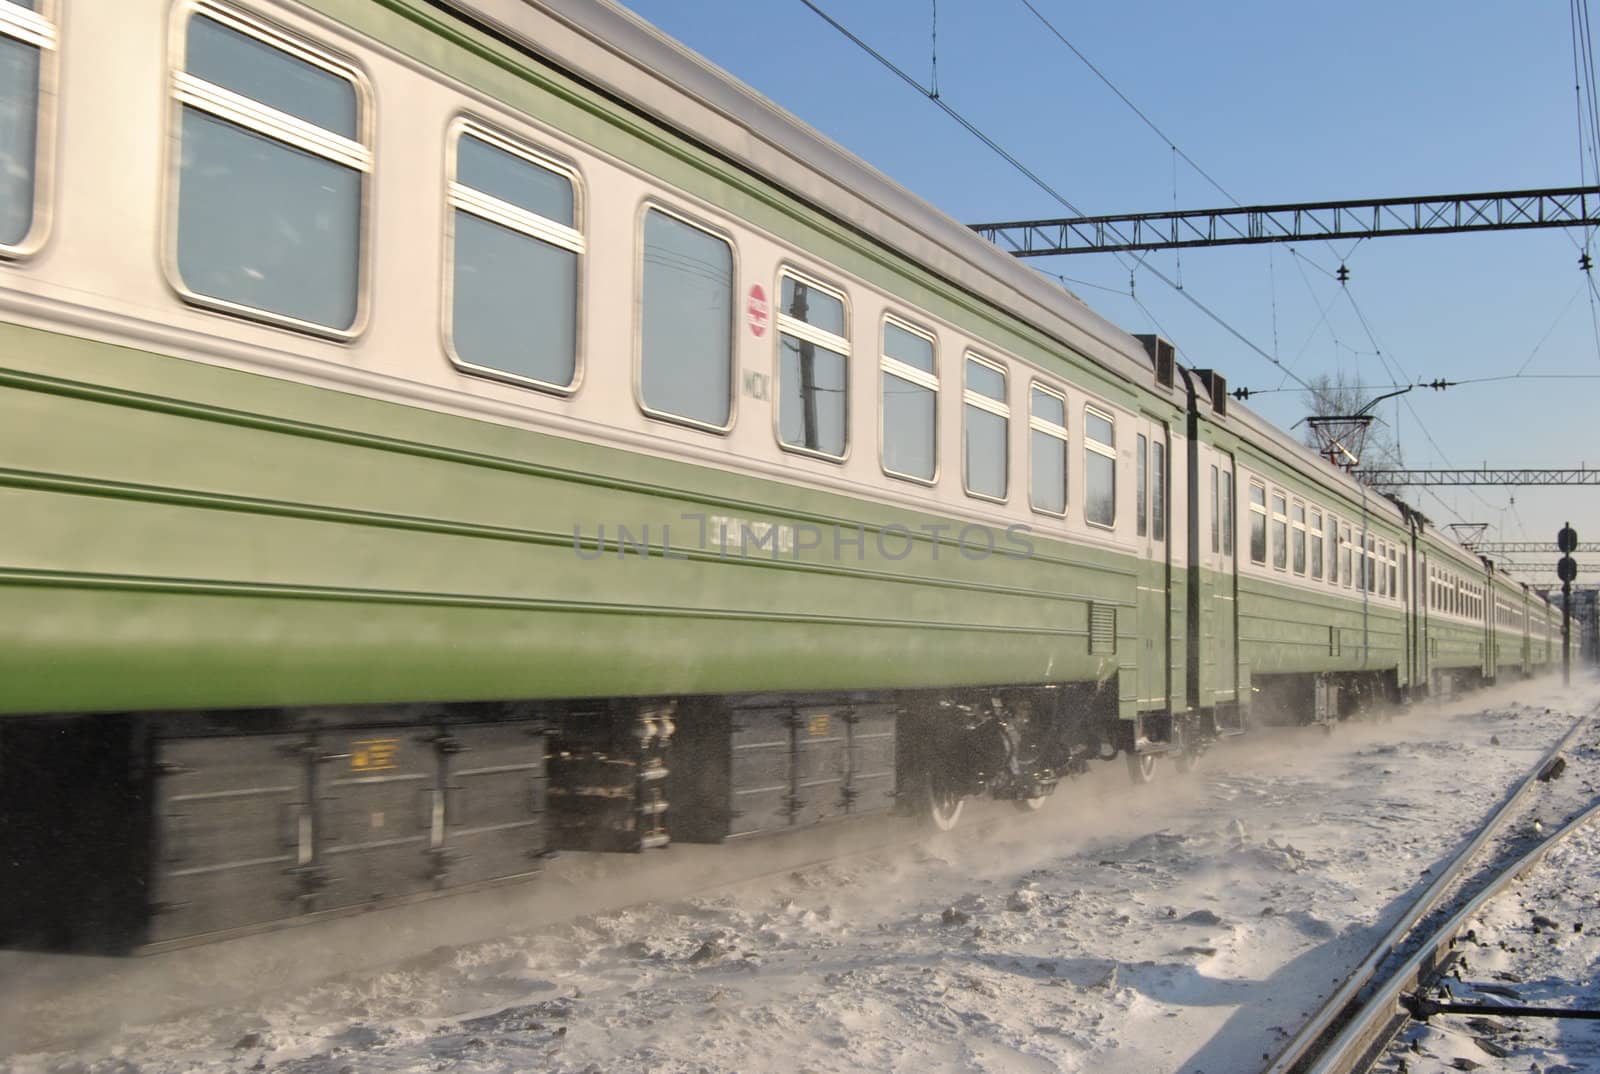 Train in winter by rogkoff